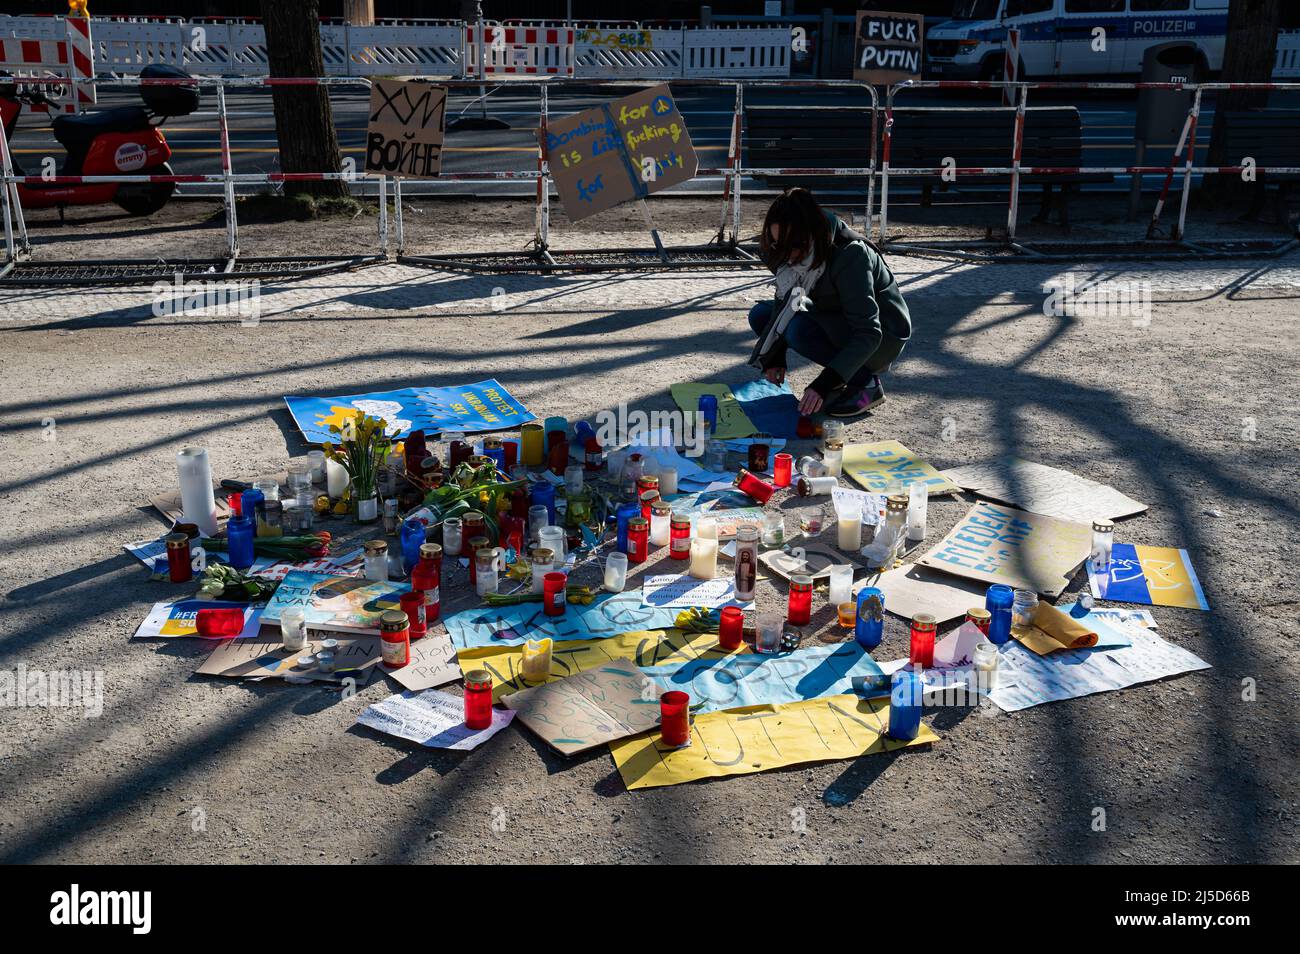 03/07/2022, Berlin, Germany, Europe - An improvised memorial statue made of signs, pictures, candles and flowers for the victims of the Ukrainian war on the ground in front of the Russian Embassy Unter den Linden in the Mitte district. [automated translation] Stock Photo